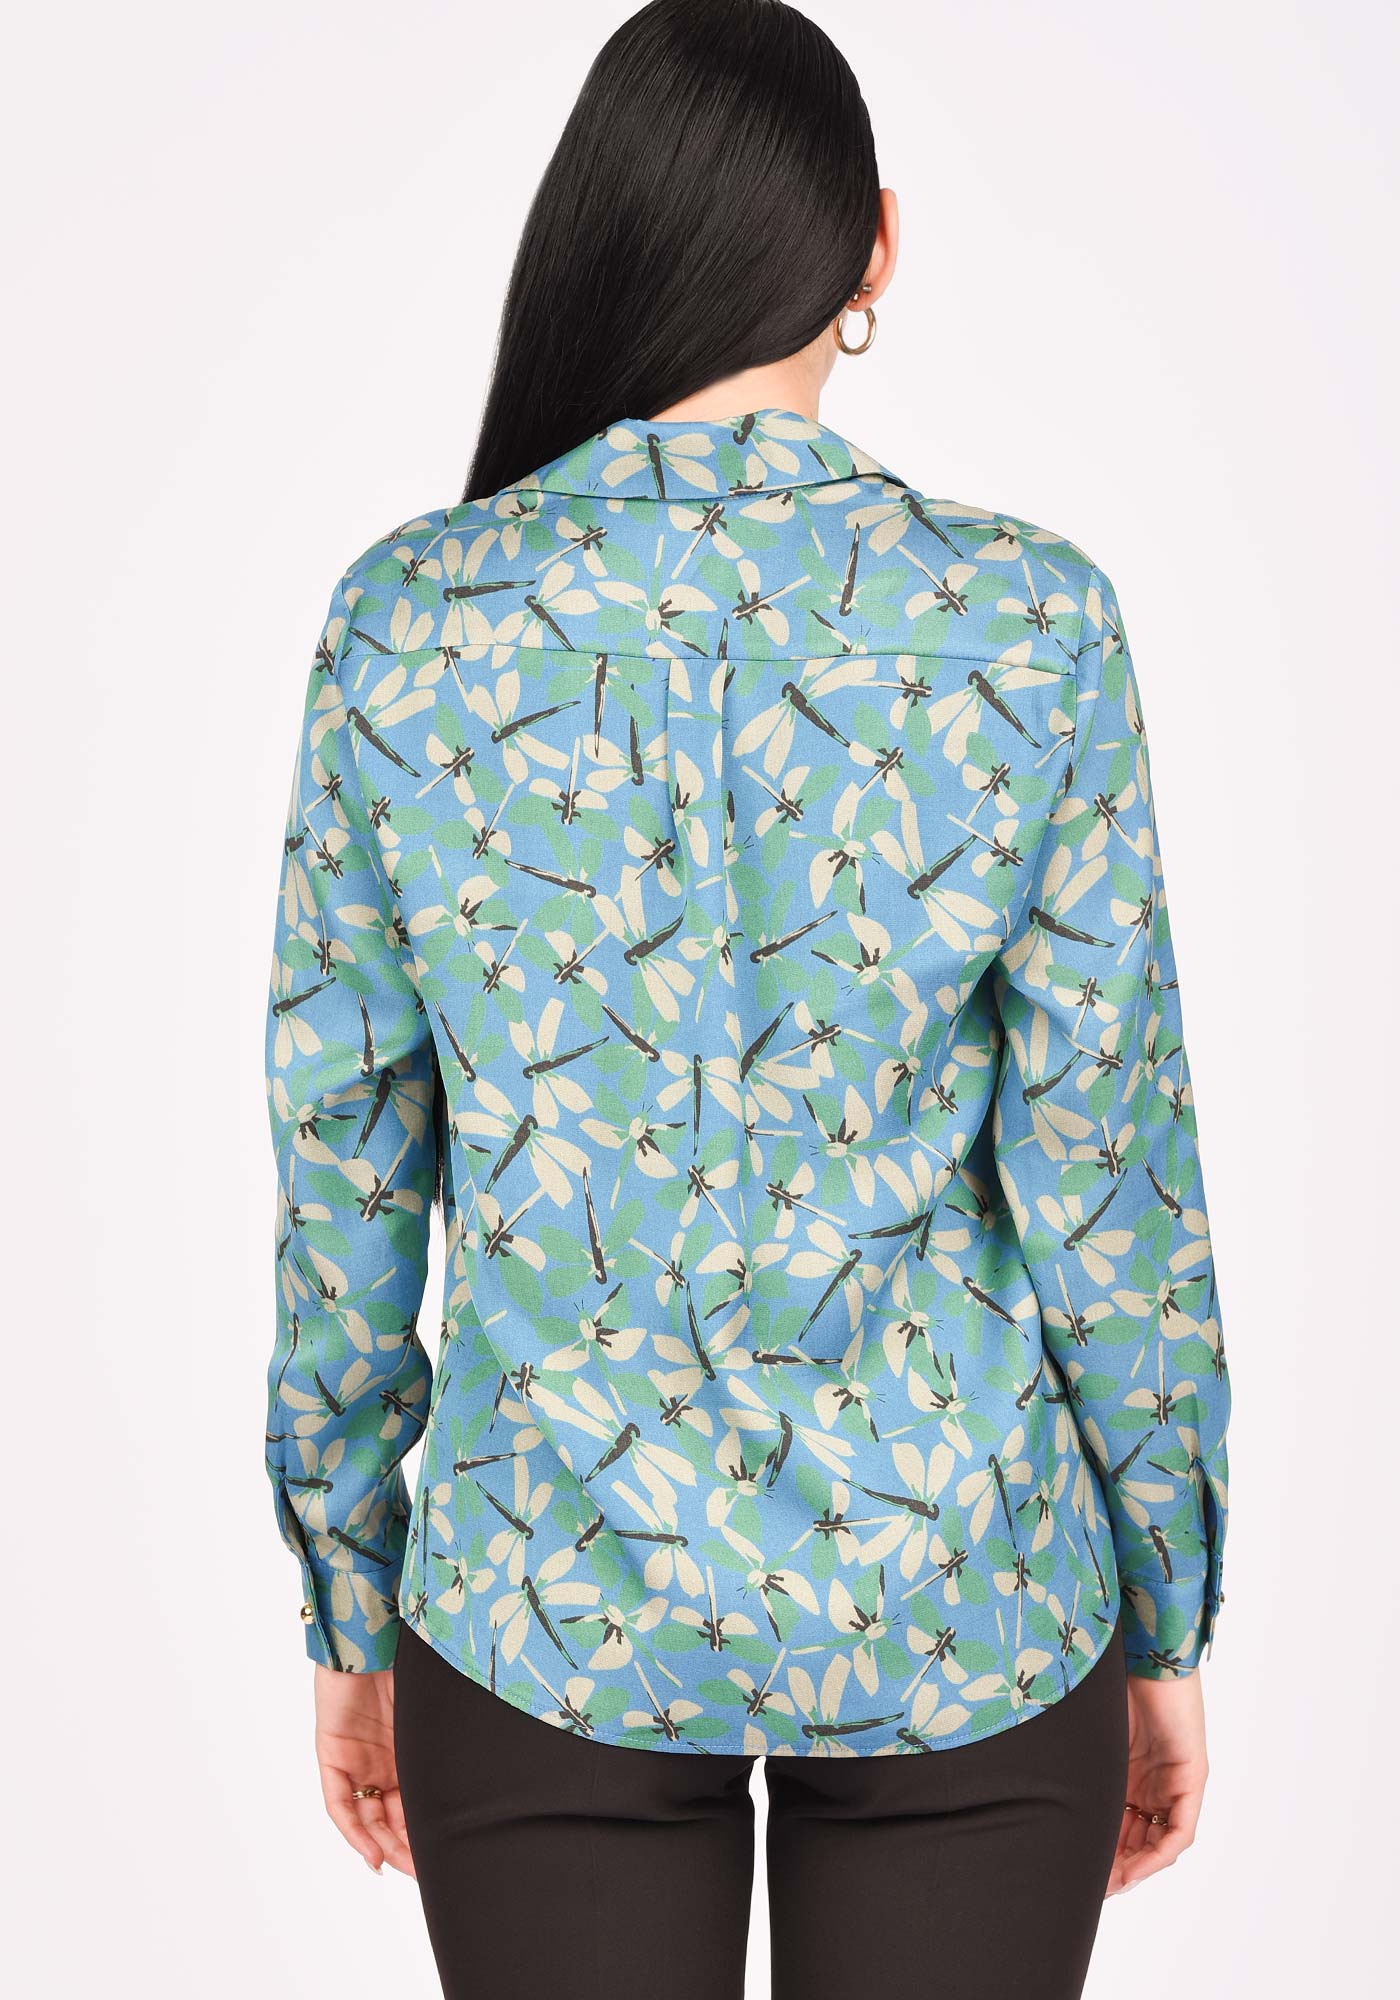 Women's Relaxed Button up Shirt in Dragonfly print Satin